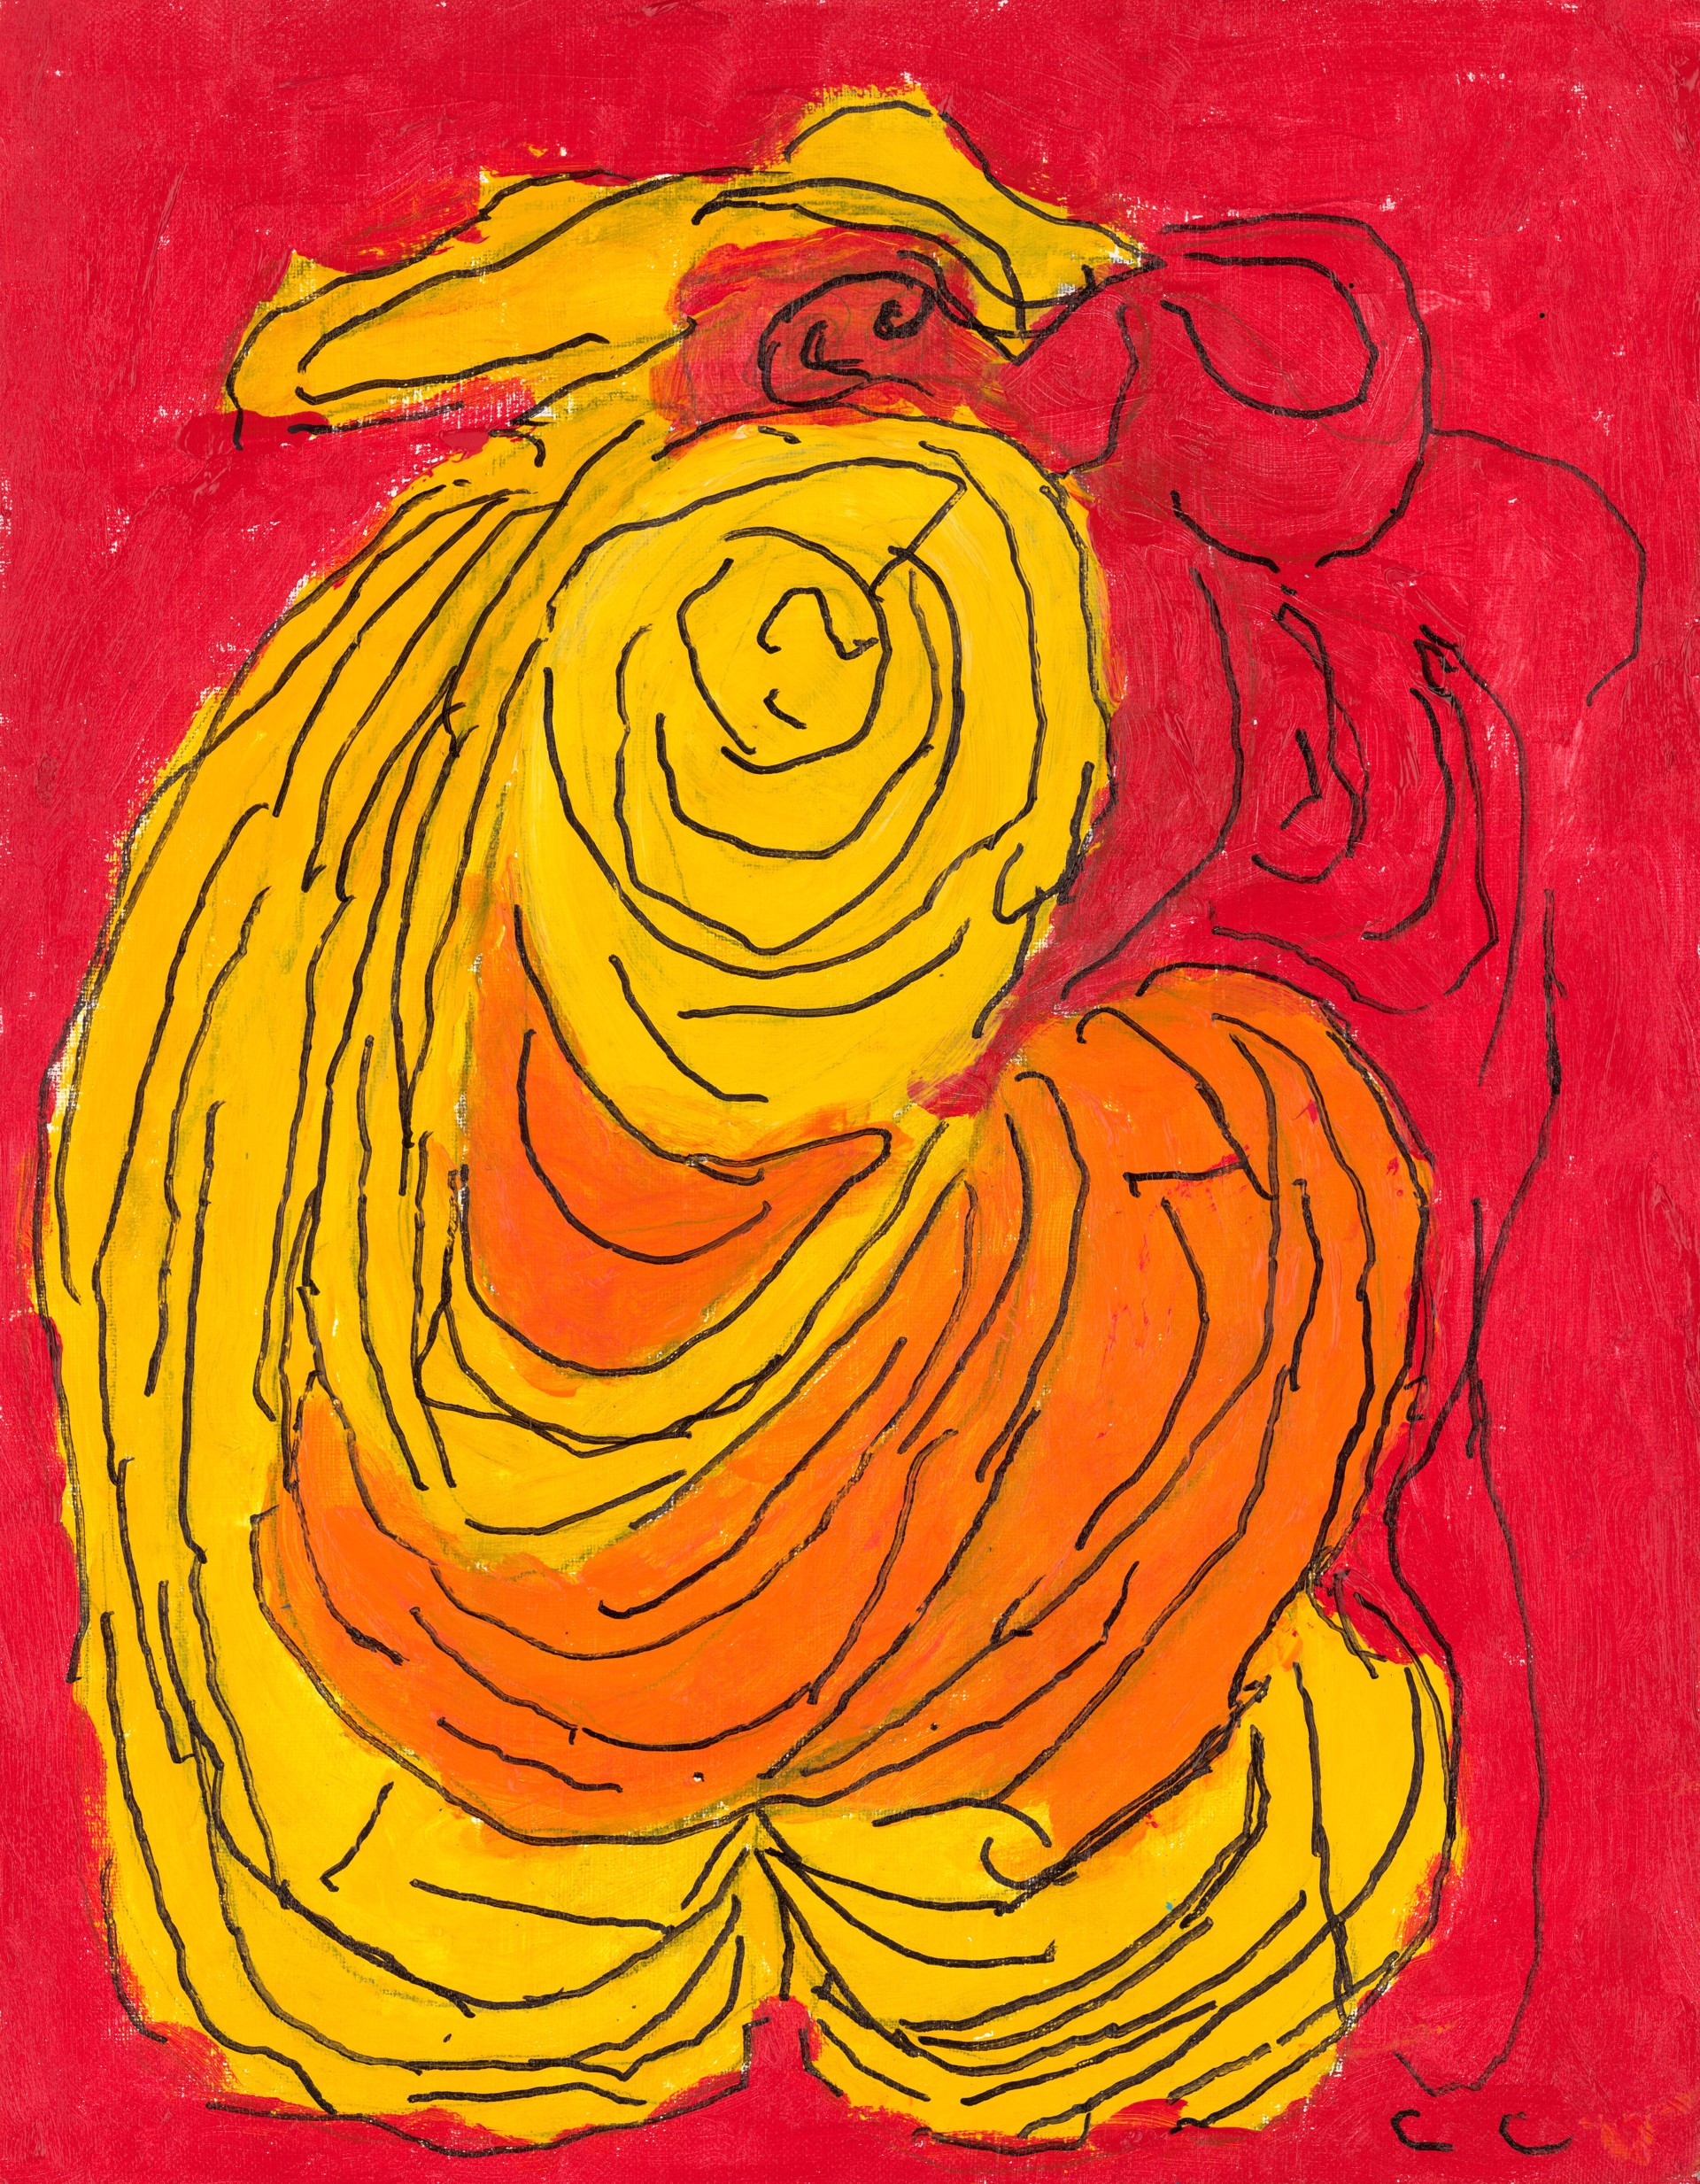 The Rooster by Calvin "Sonny" Clarke